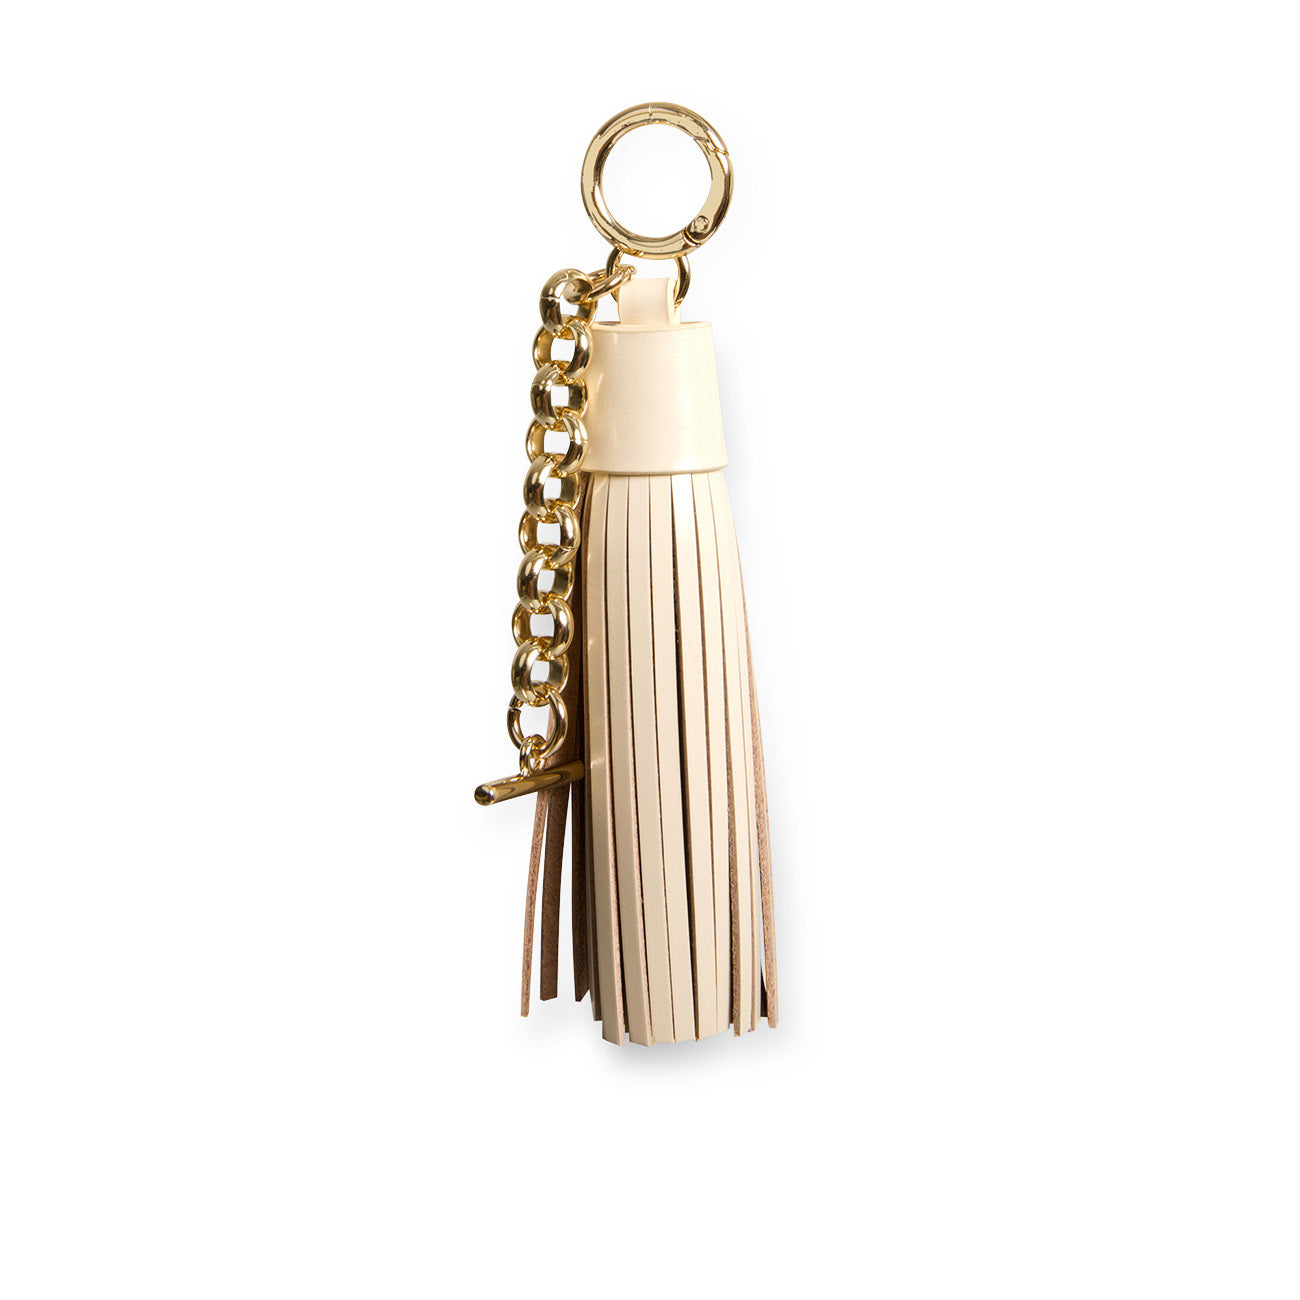 SAMPLE - The Harlow Lux Keychain Cream Light Gold